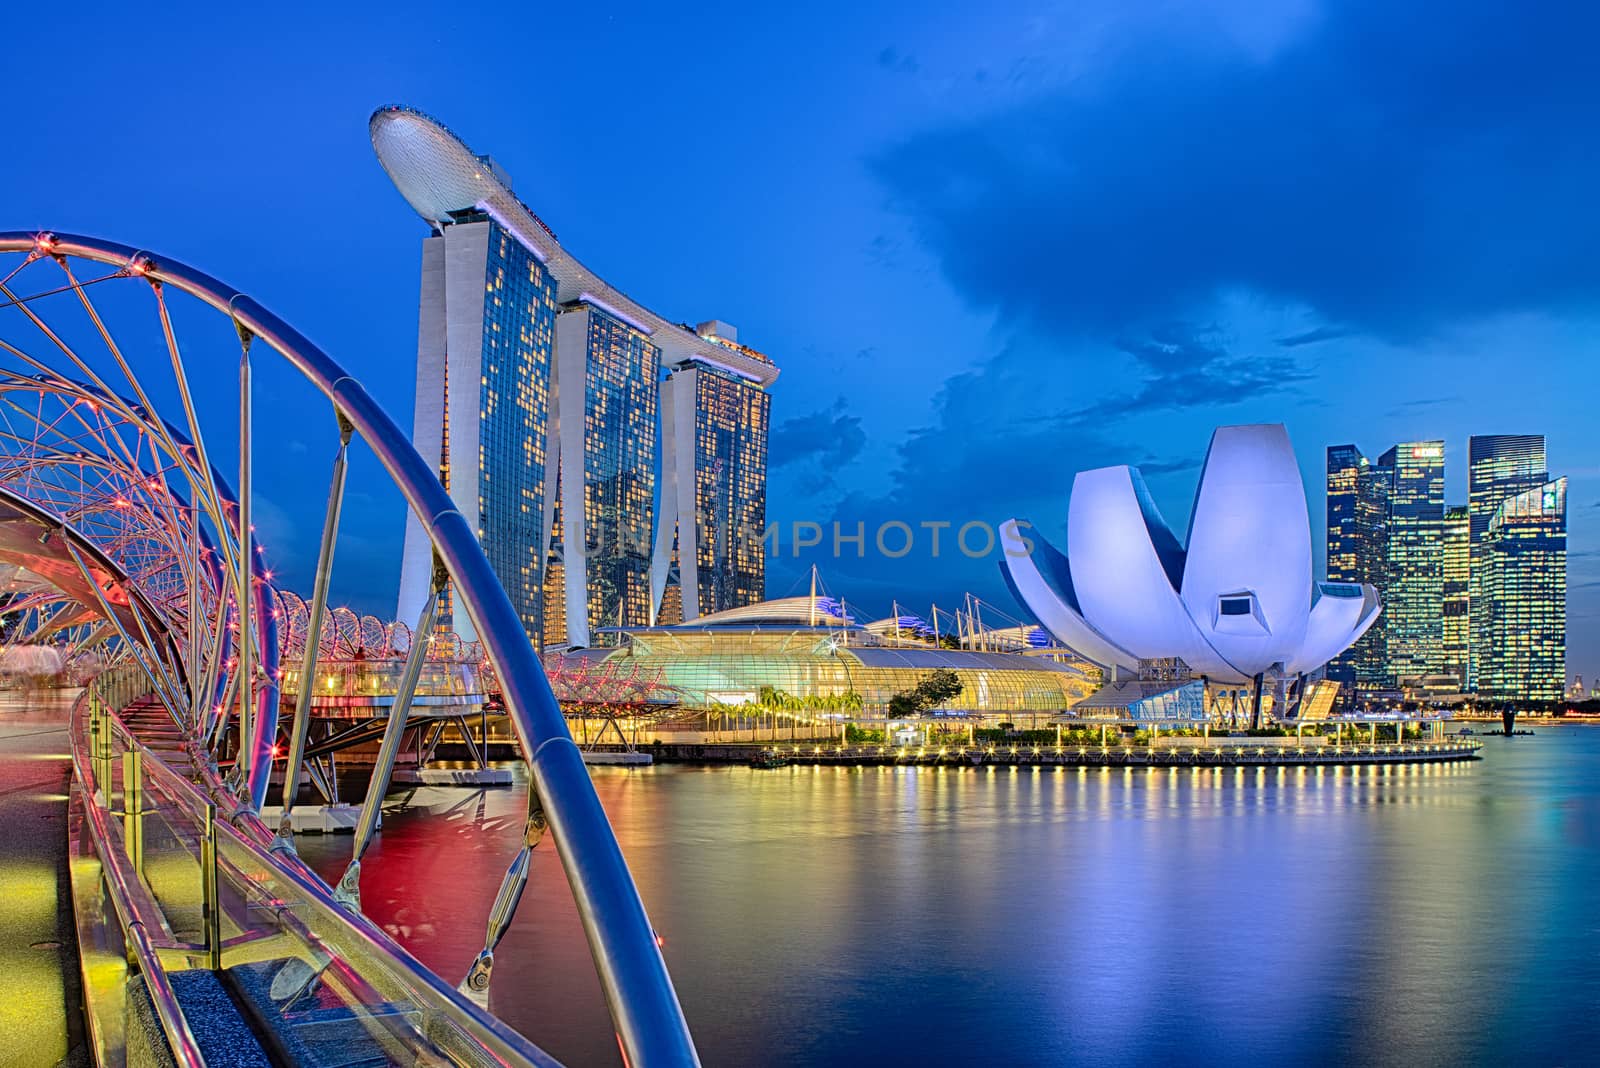 SINGAPORE CITY, SINGAPORE - APRIL 21, 2018: Marina Bay Sands at night the largest hotel in Asia. It opened on 27 April 2010. Singapore on April 19, 2018